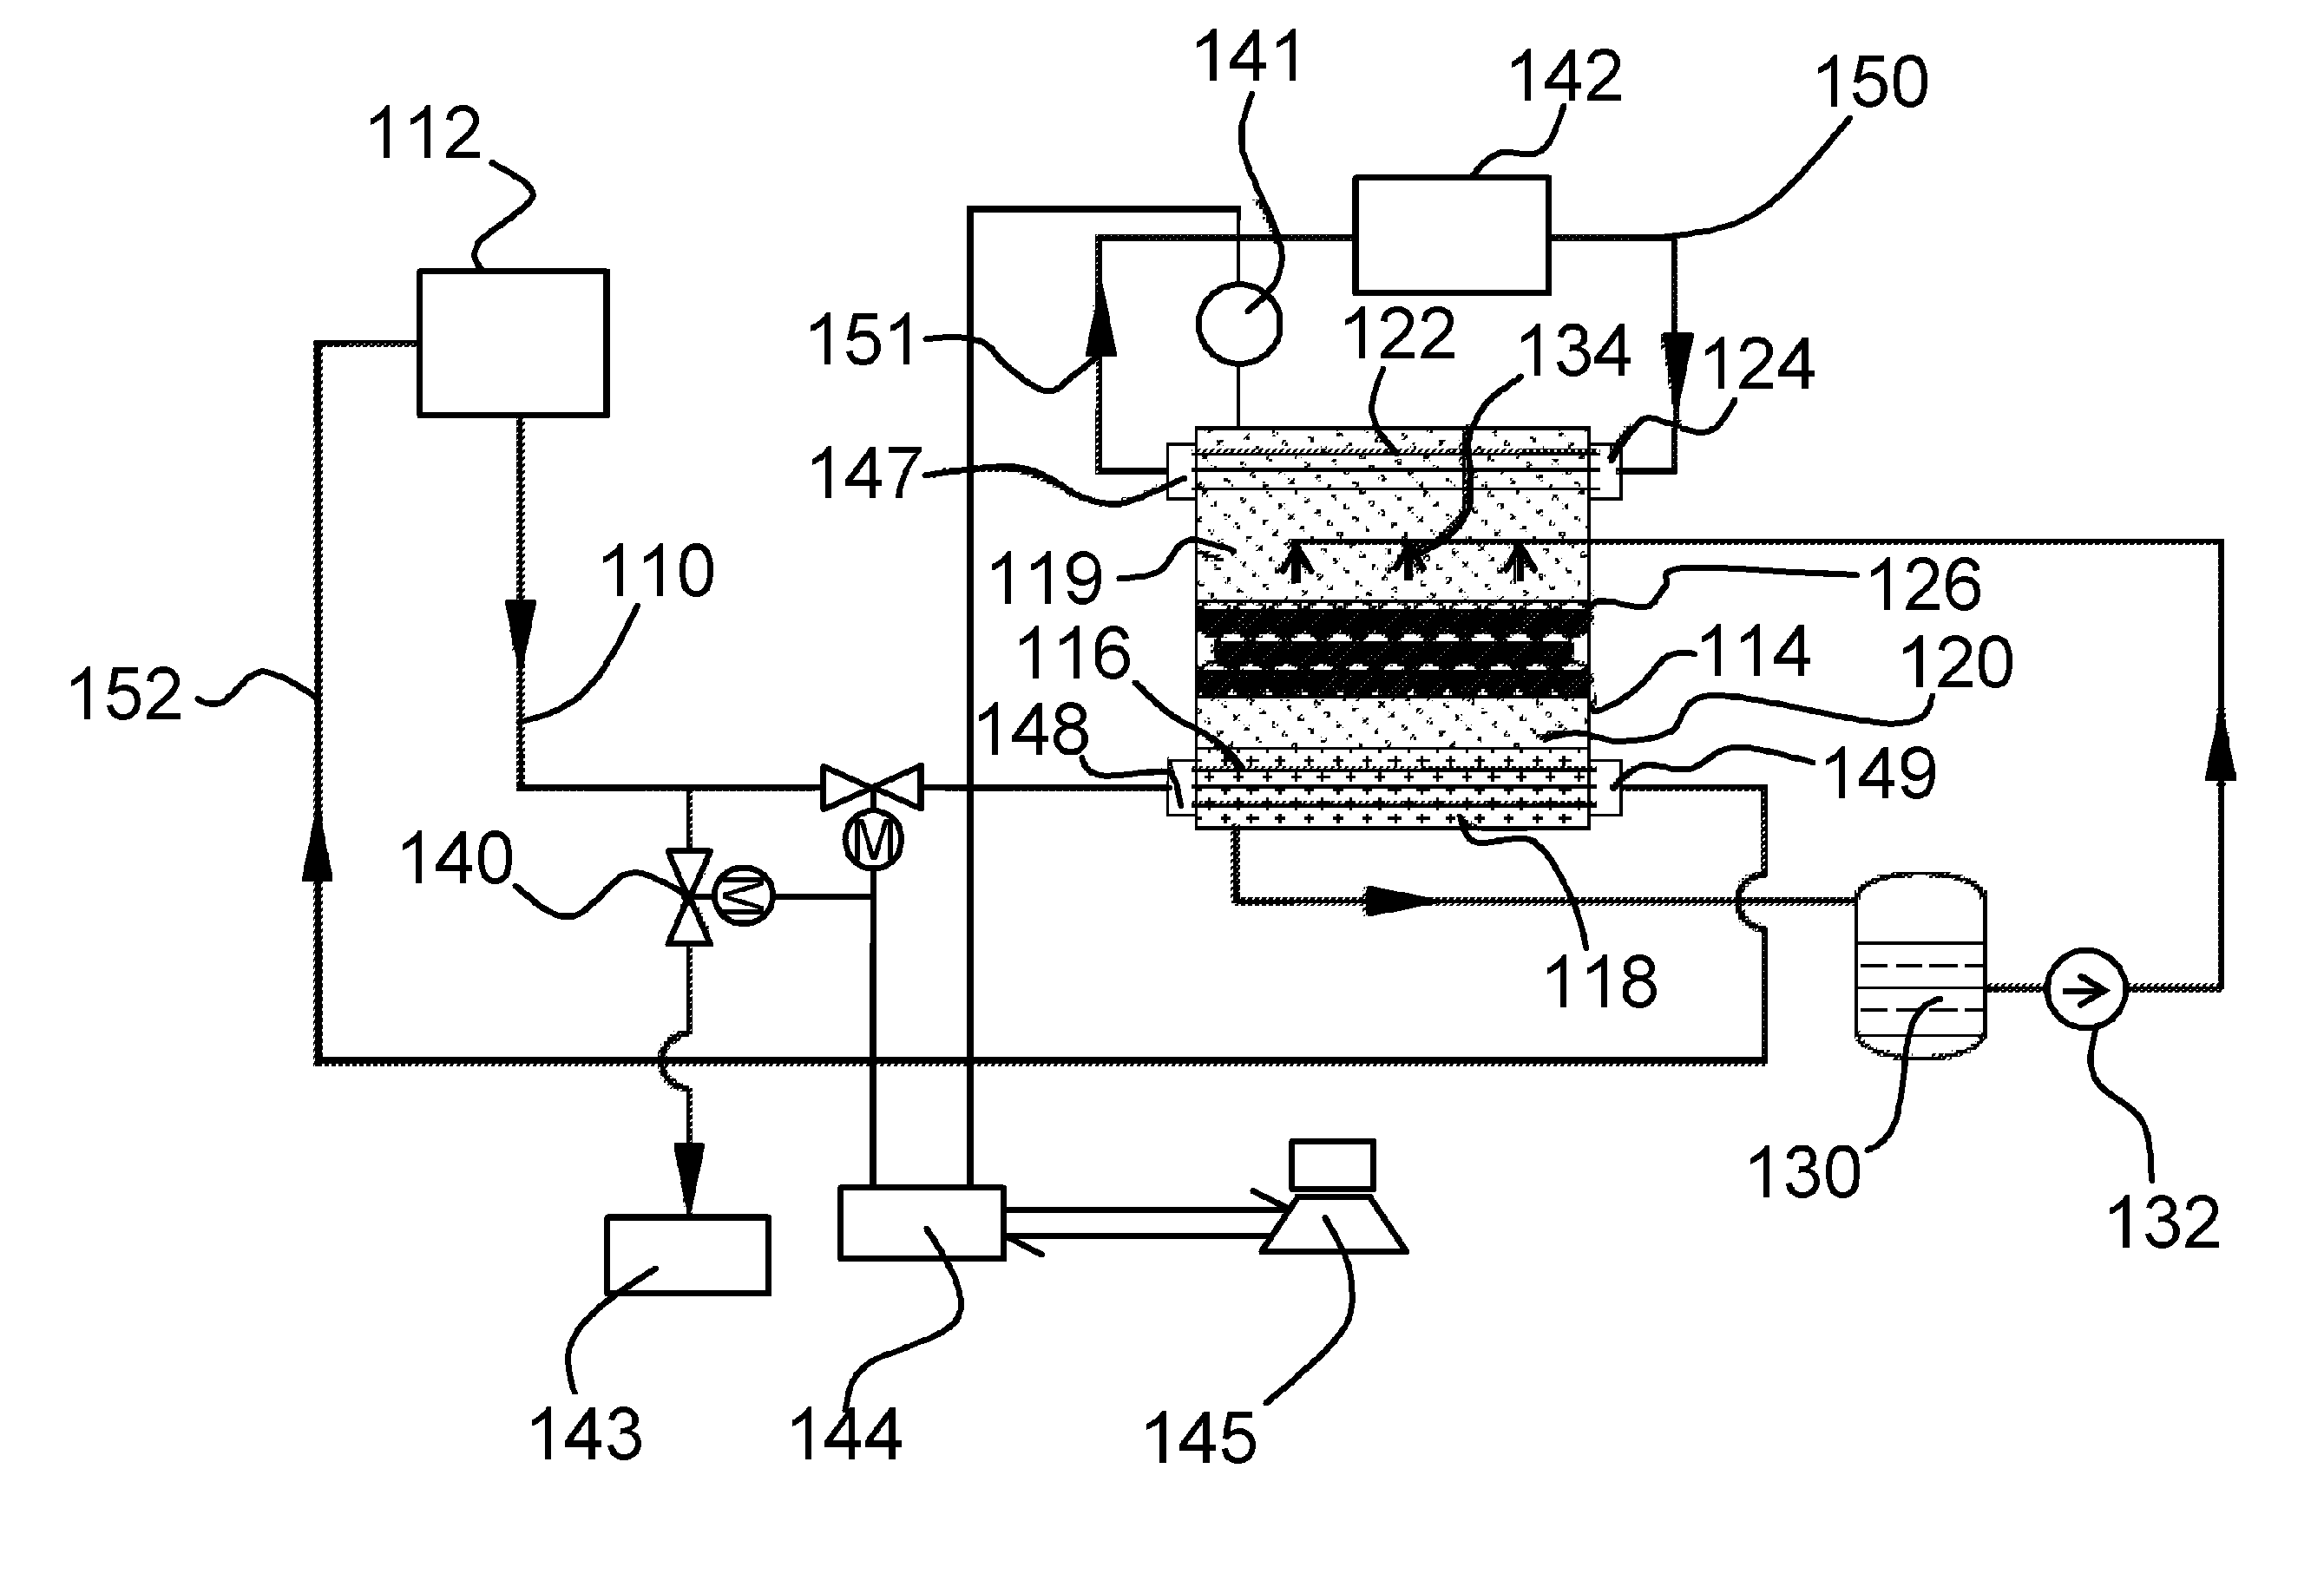 Systems and methods of thermal transfer and/or storage